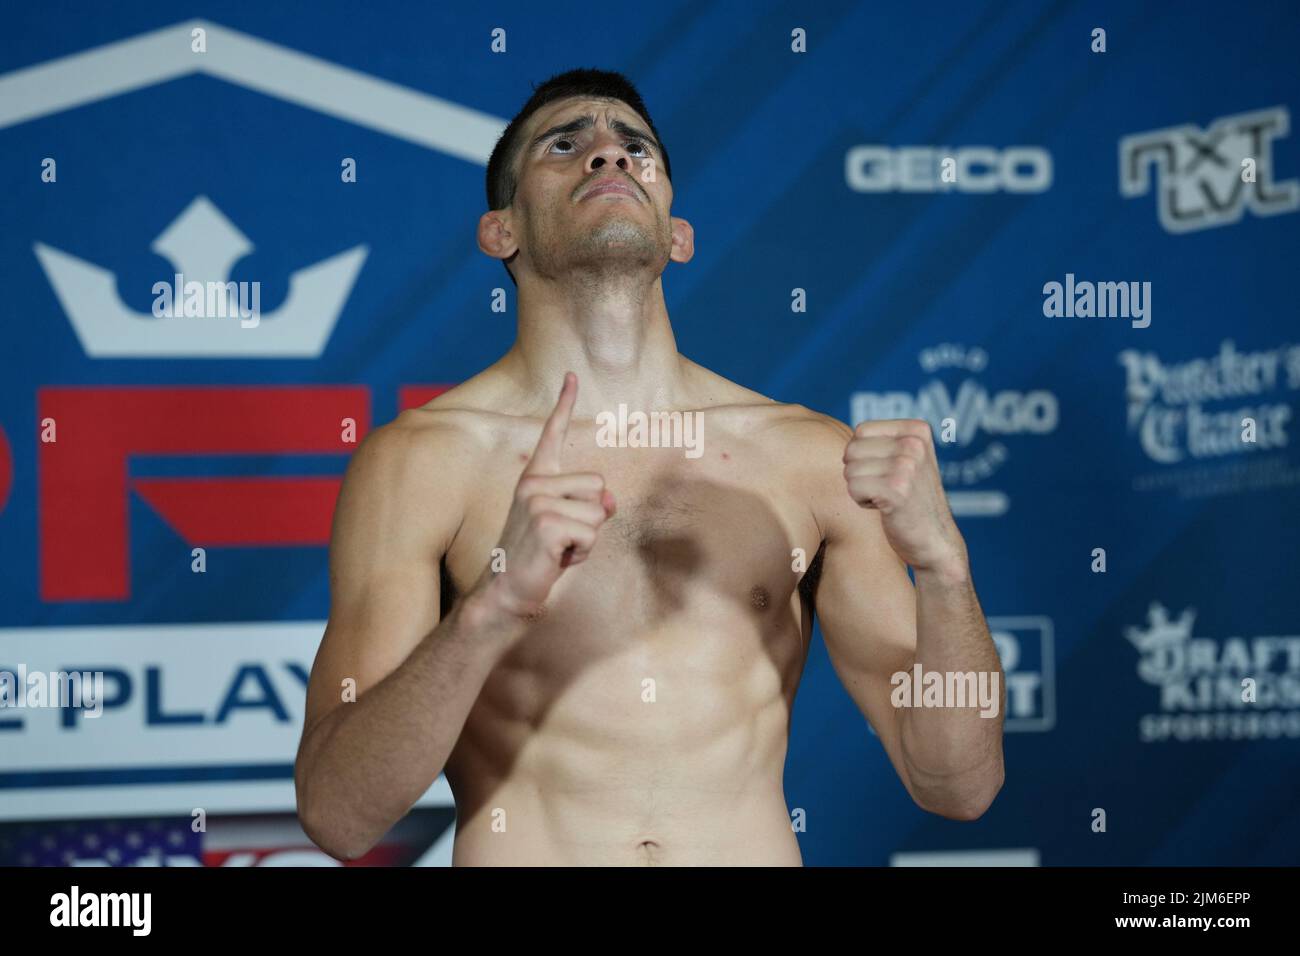 NEW YORK CITY, NY - August 4: Alex Martinez steps on the scale for the official weigh-ins at The New Yorker Hotel for 2022 PFL Playoffs Semi-Finals : Official Weigh-ins on August 4, 2022 in New York City, NY, United States. (Photo by Louis Grasse/PxImages) Stock Photo